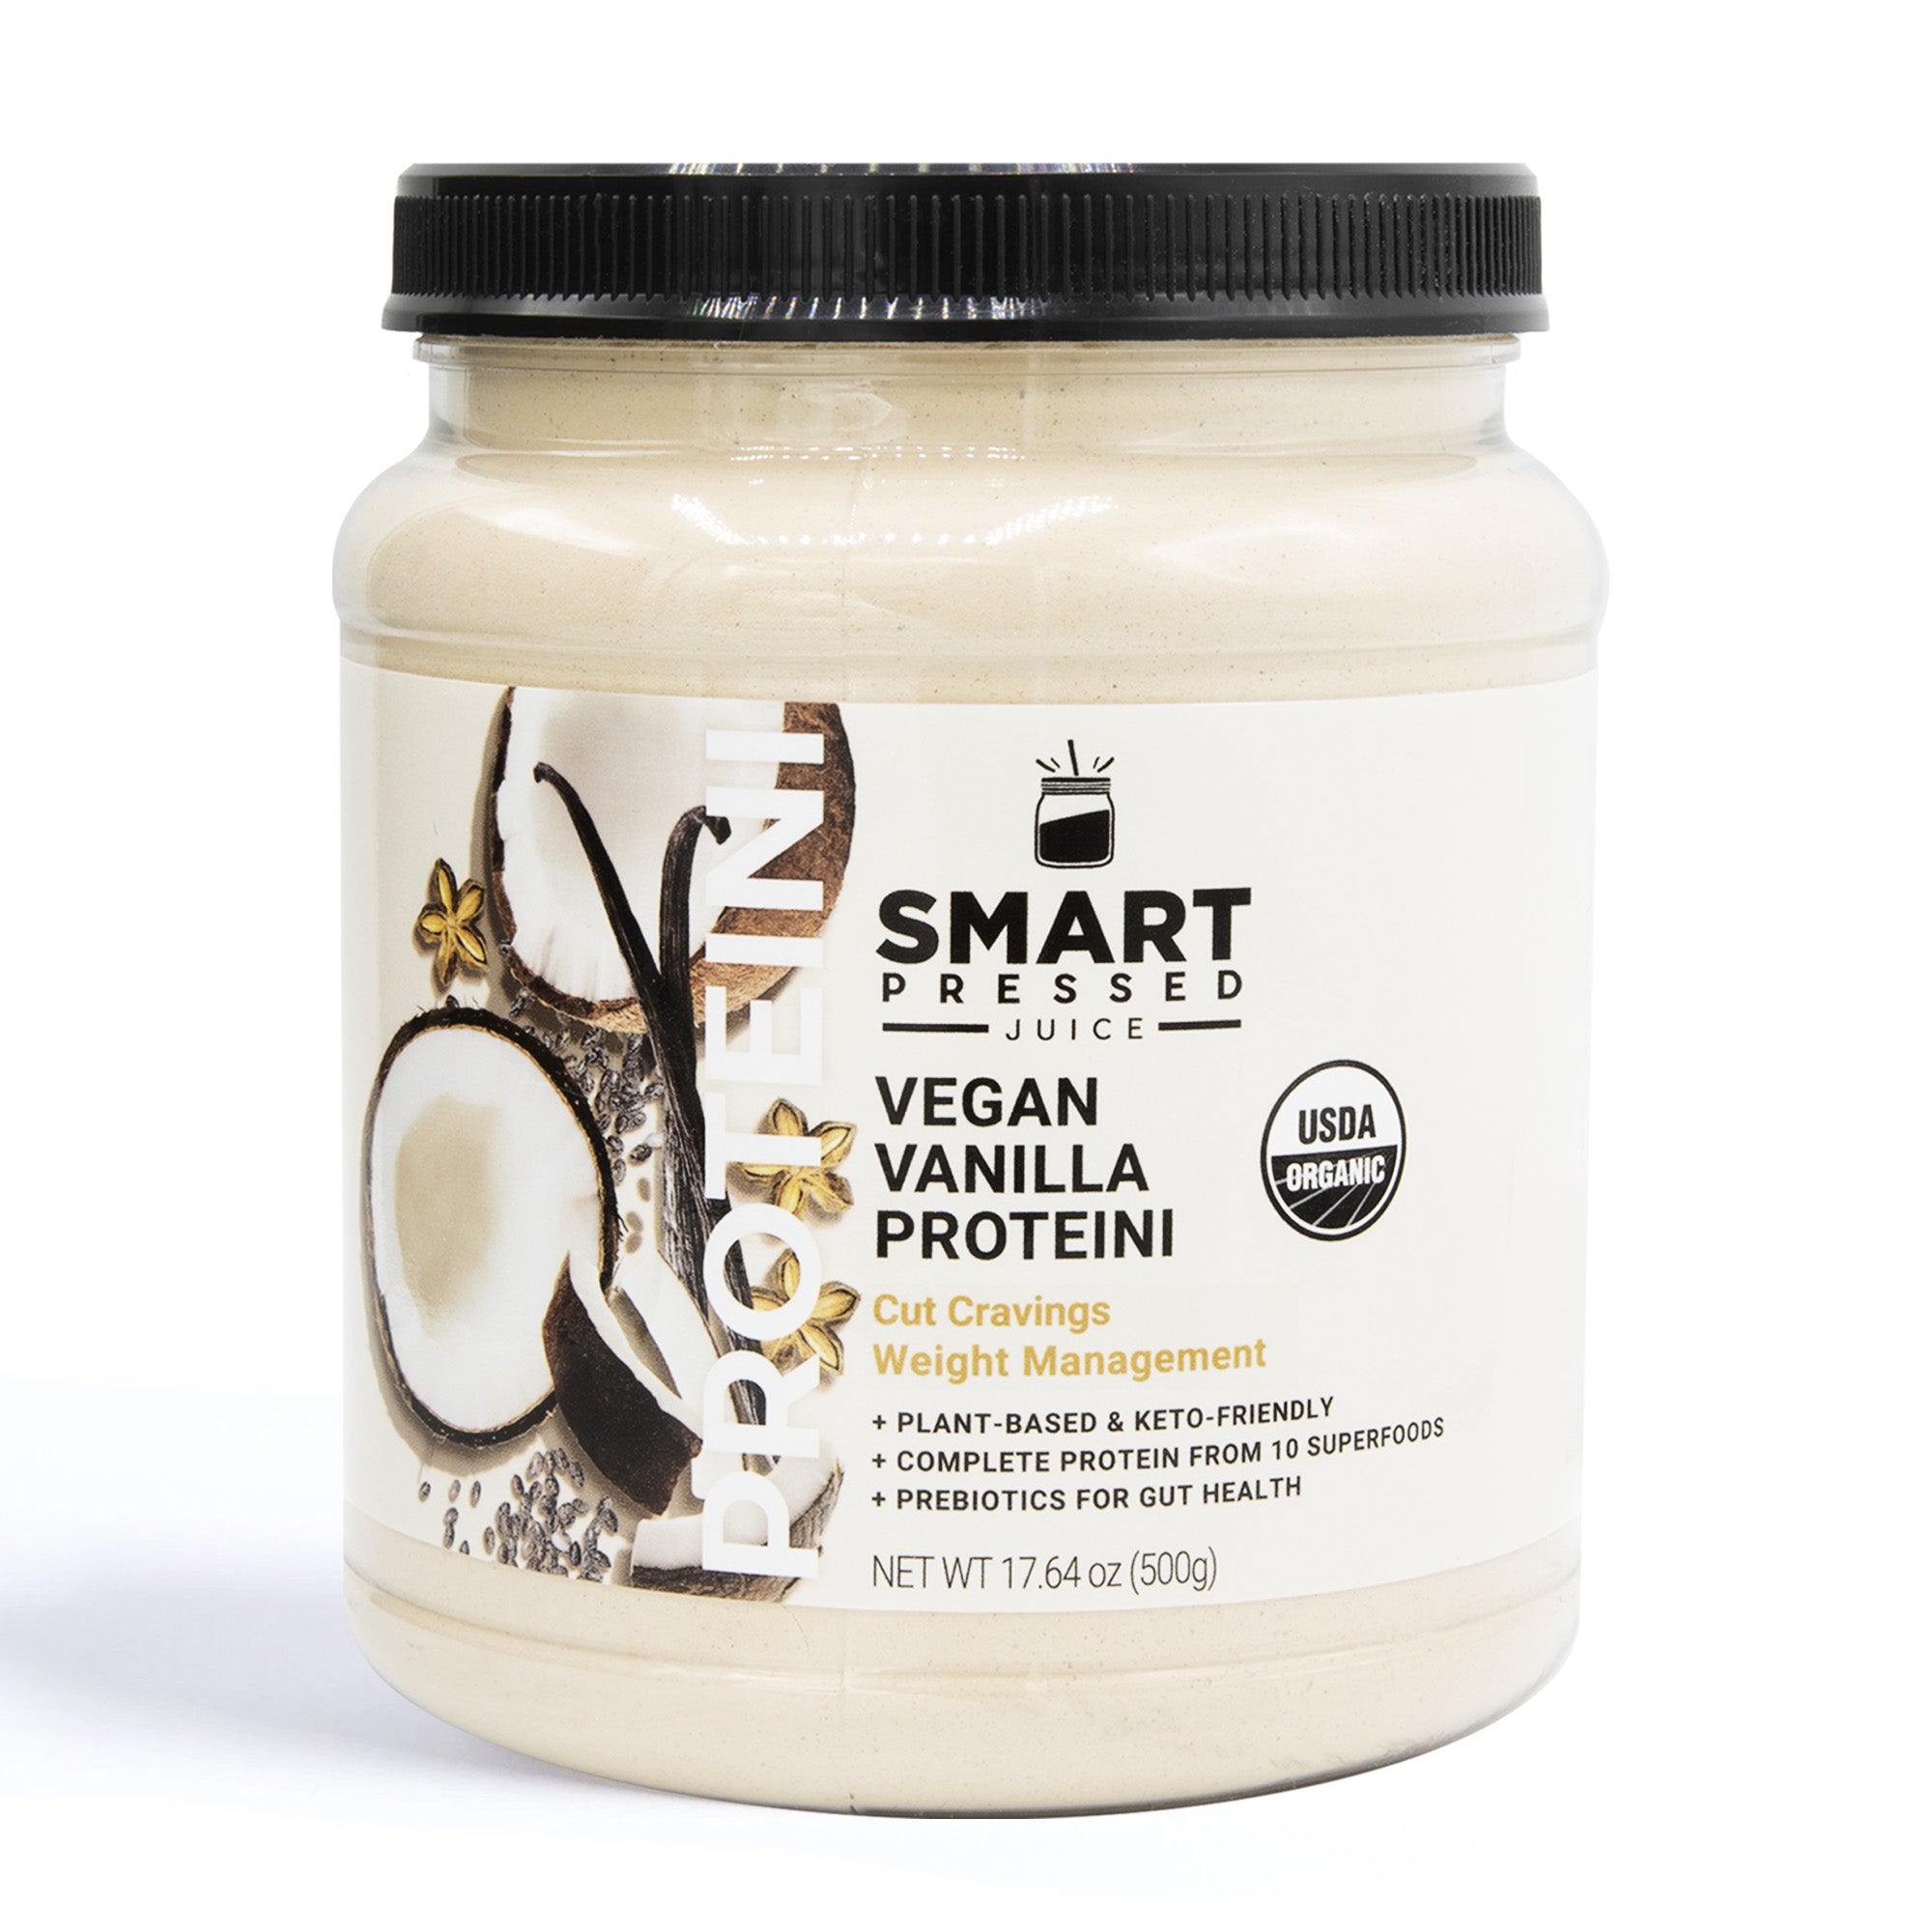 one jar of 500 grams of Vegan Vanilla Proteini against a white background.